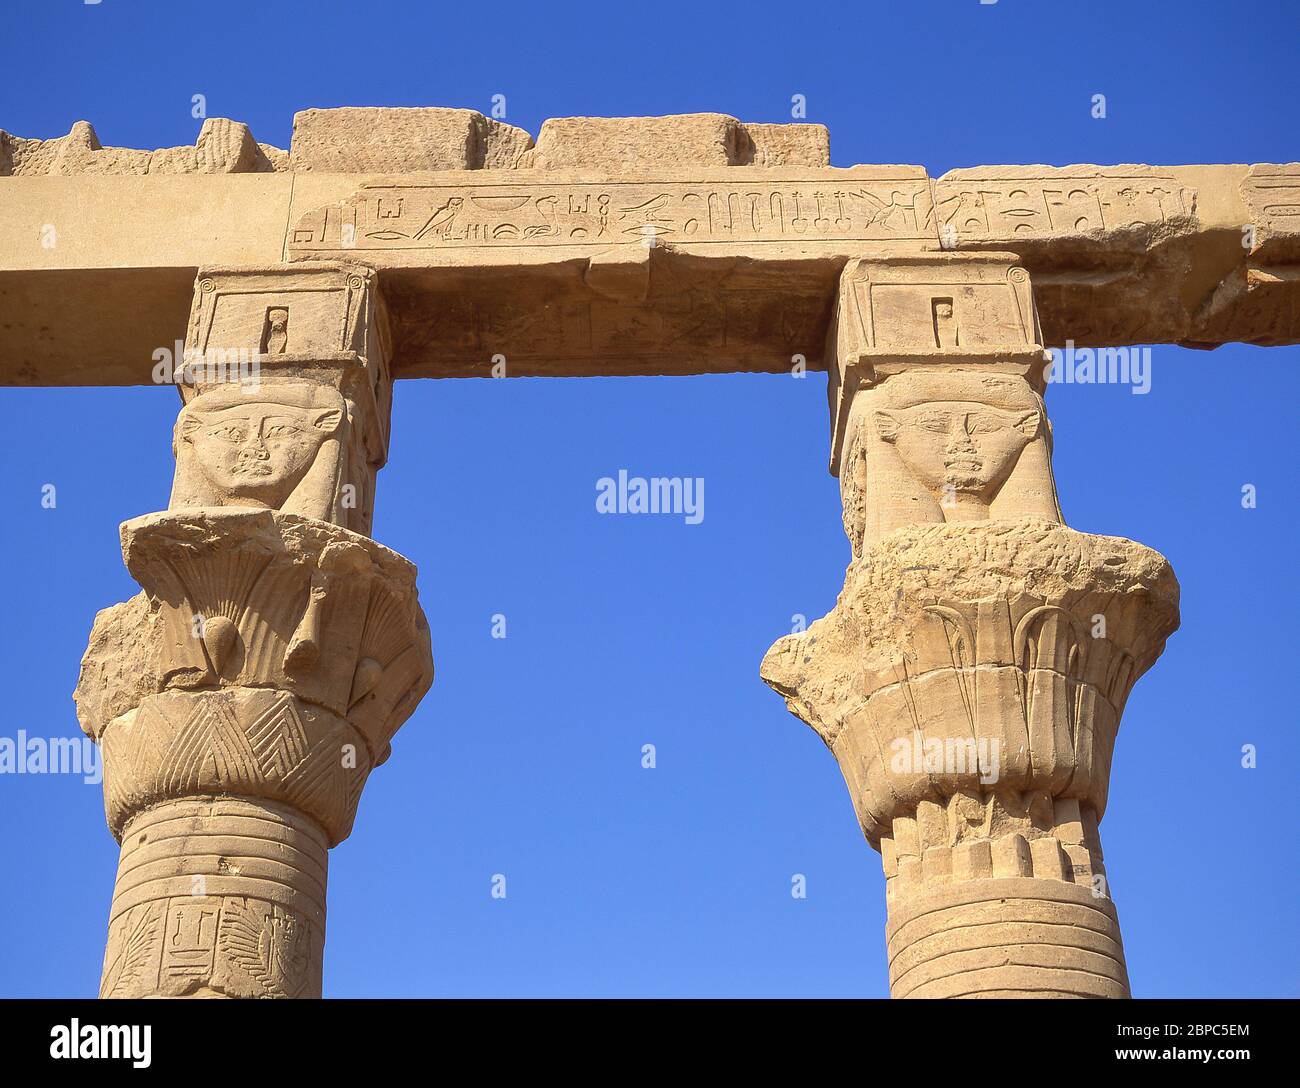 Capitals of east colonnade, The Temple of Isis, Agikia Island, Lake Nasser, Aswan, Aswan Governorate, Republic of Egypt Stock Photo